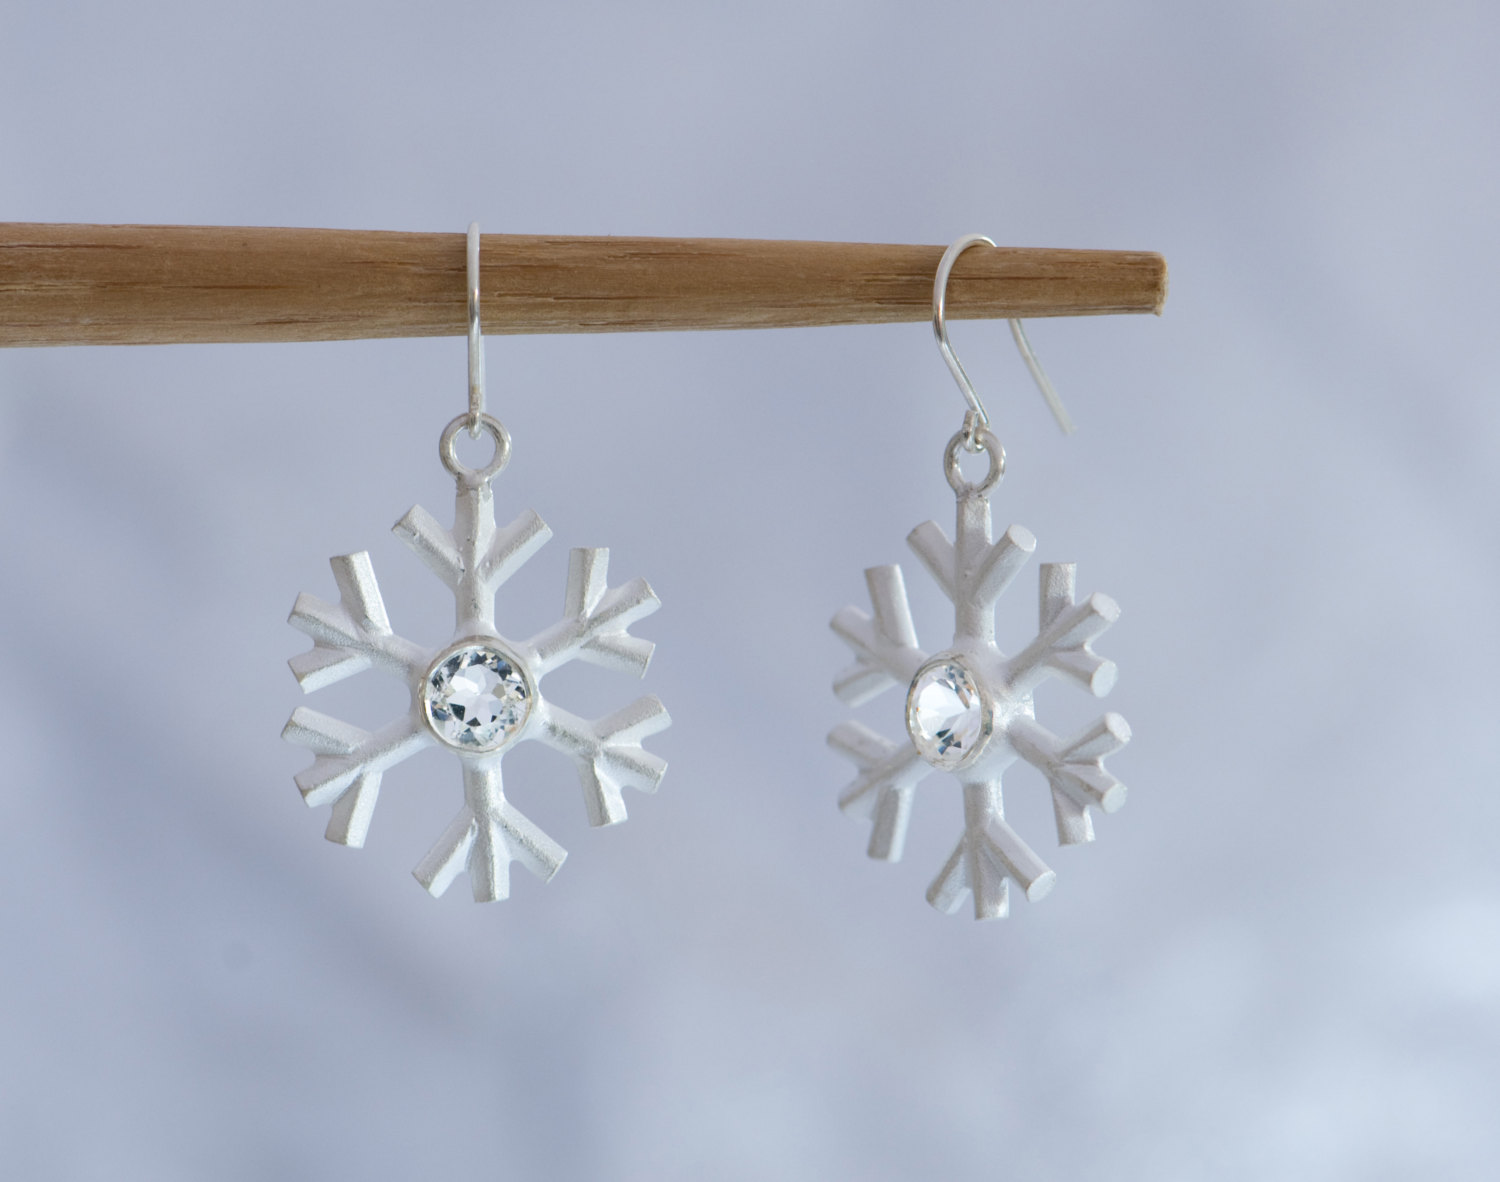 A perfect winter gift. White topaz snowflake earrings, set in sterling silver. Snowflake 20mm across, stone 5mm. Designed and handmade by William White, UK